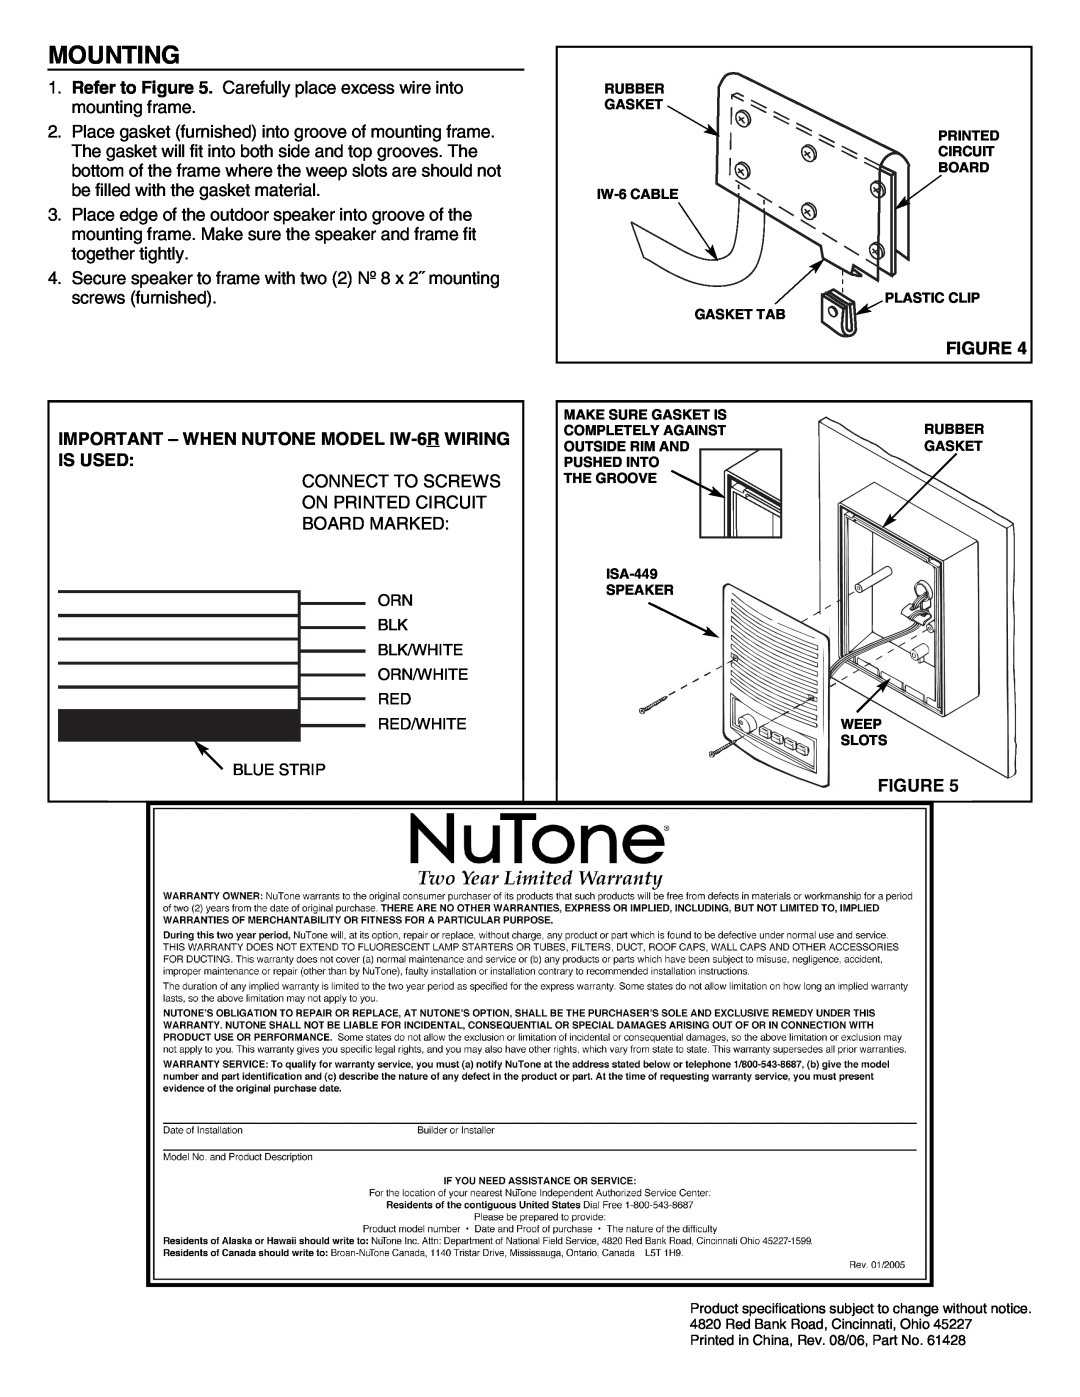 NuTone ISA-449WH installation instructions Mounting, IMPORTANT - WHEN NUTONE MODEL IW-6RWIRING IS USED 